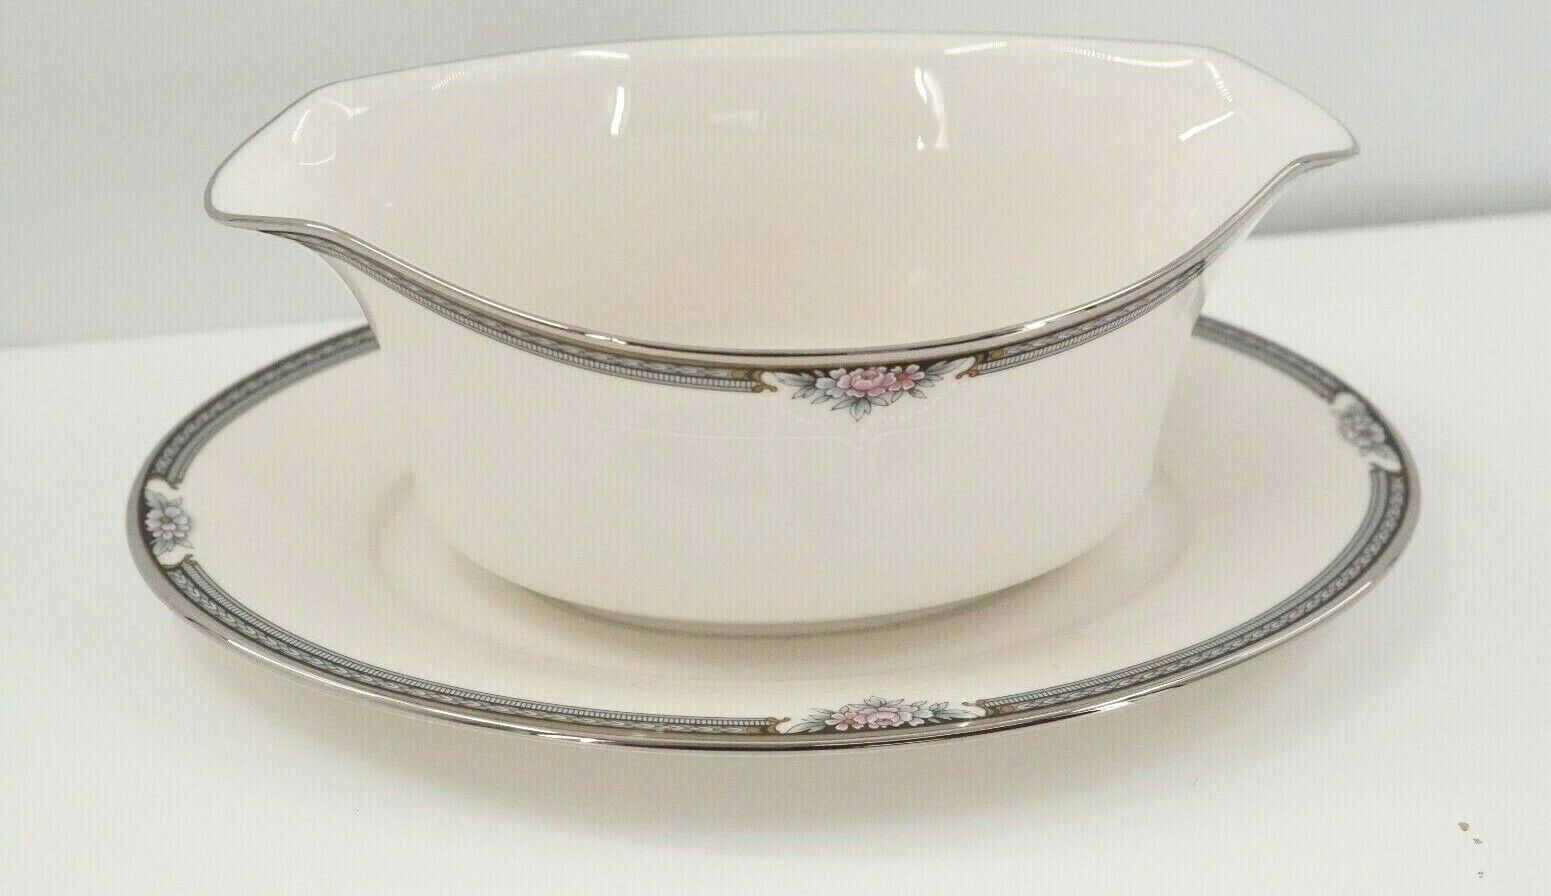 Noritake Halifax Fine China Gravy Boat with Attached Underplate